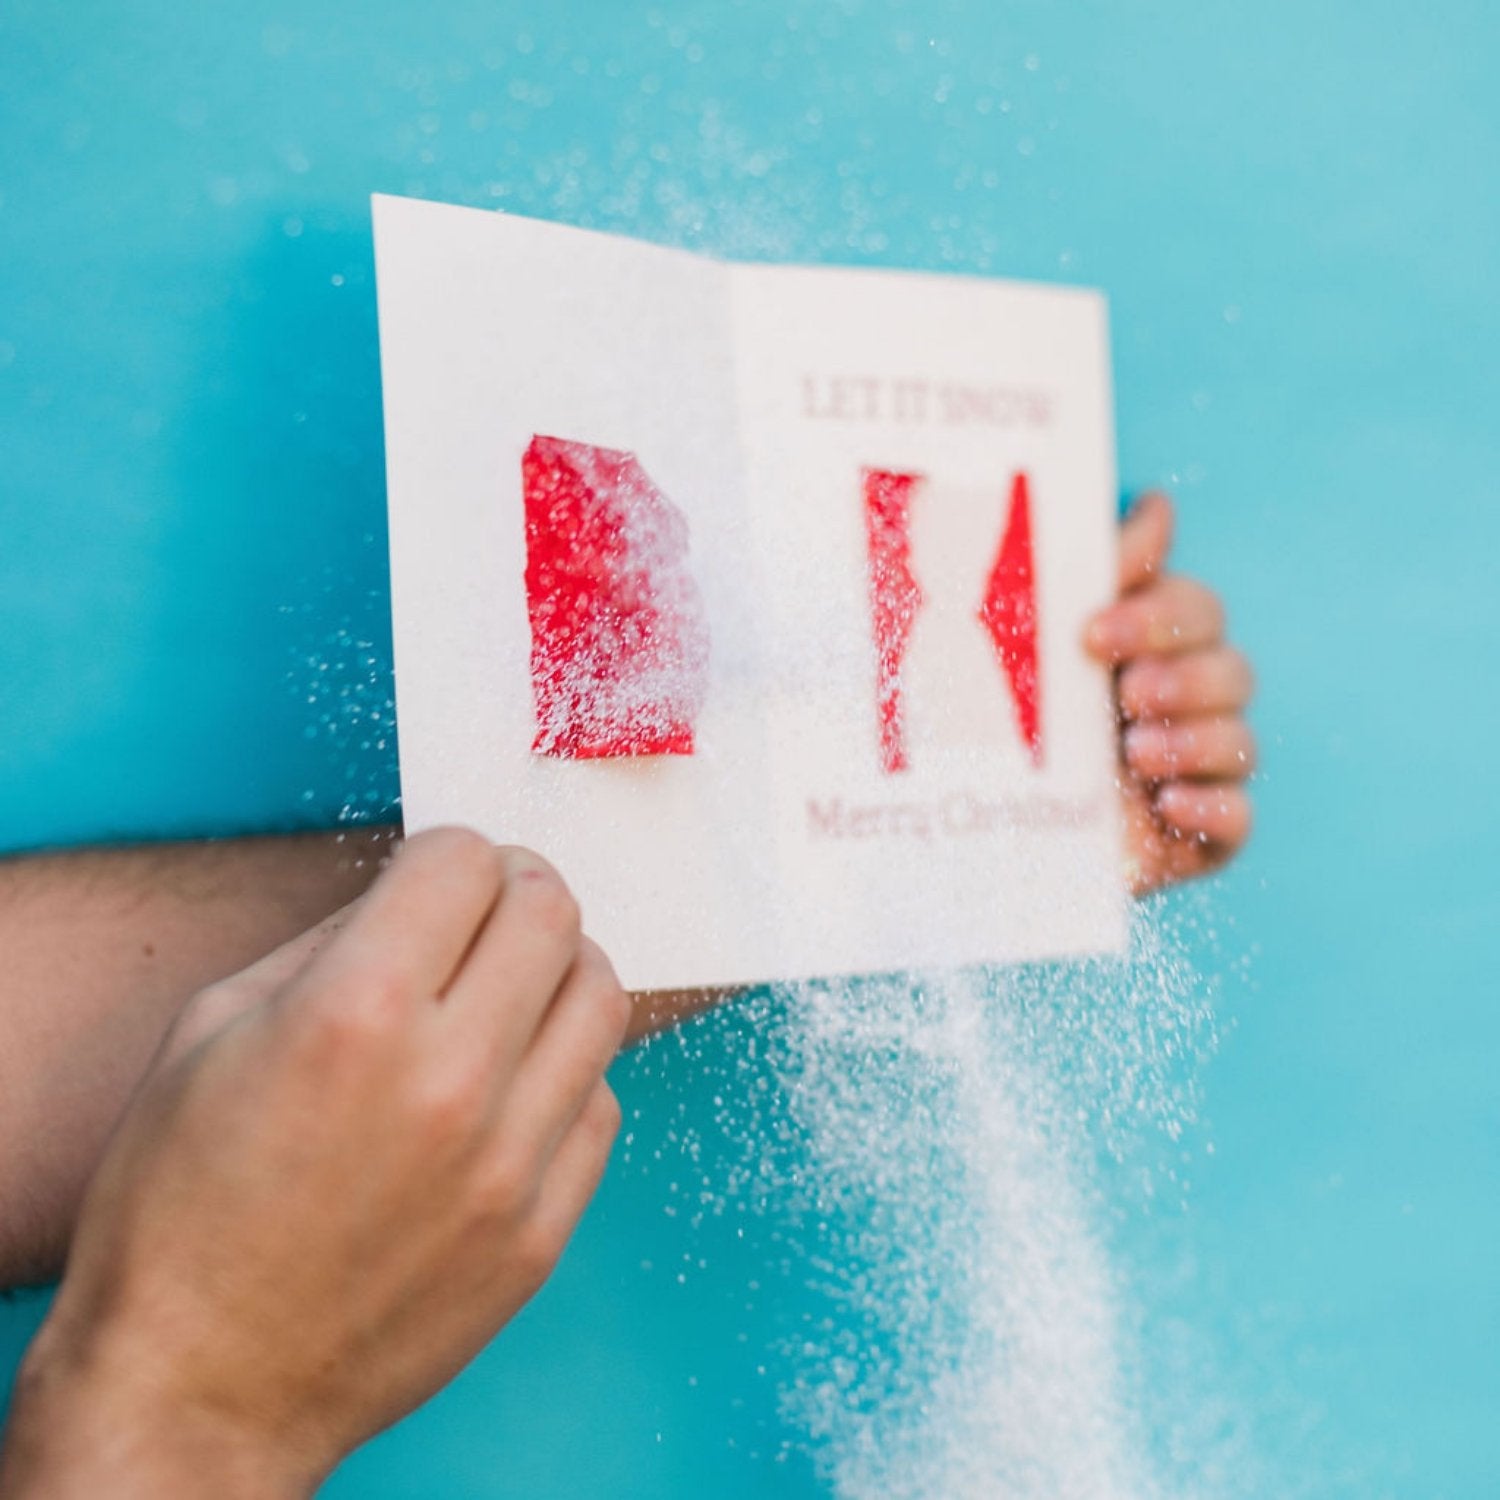 Let It Snow, Let It Snow - Glitter Bomb Card Pranks Anonymous send hilarious pranks and gag gifts to your friends or family.